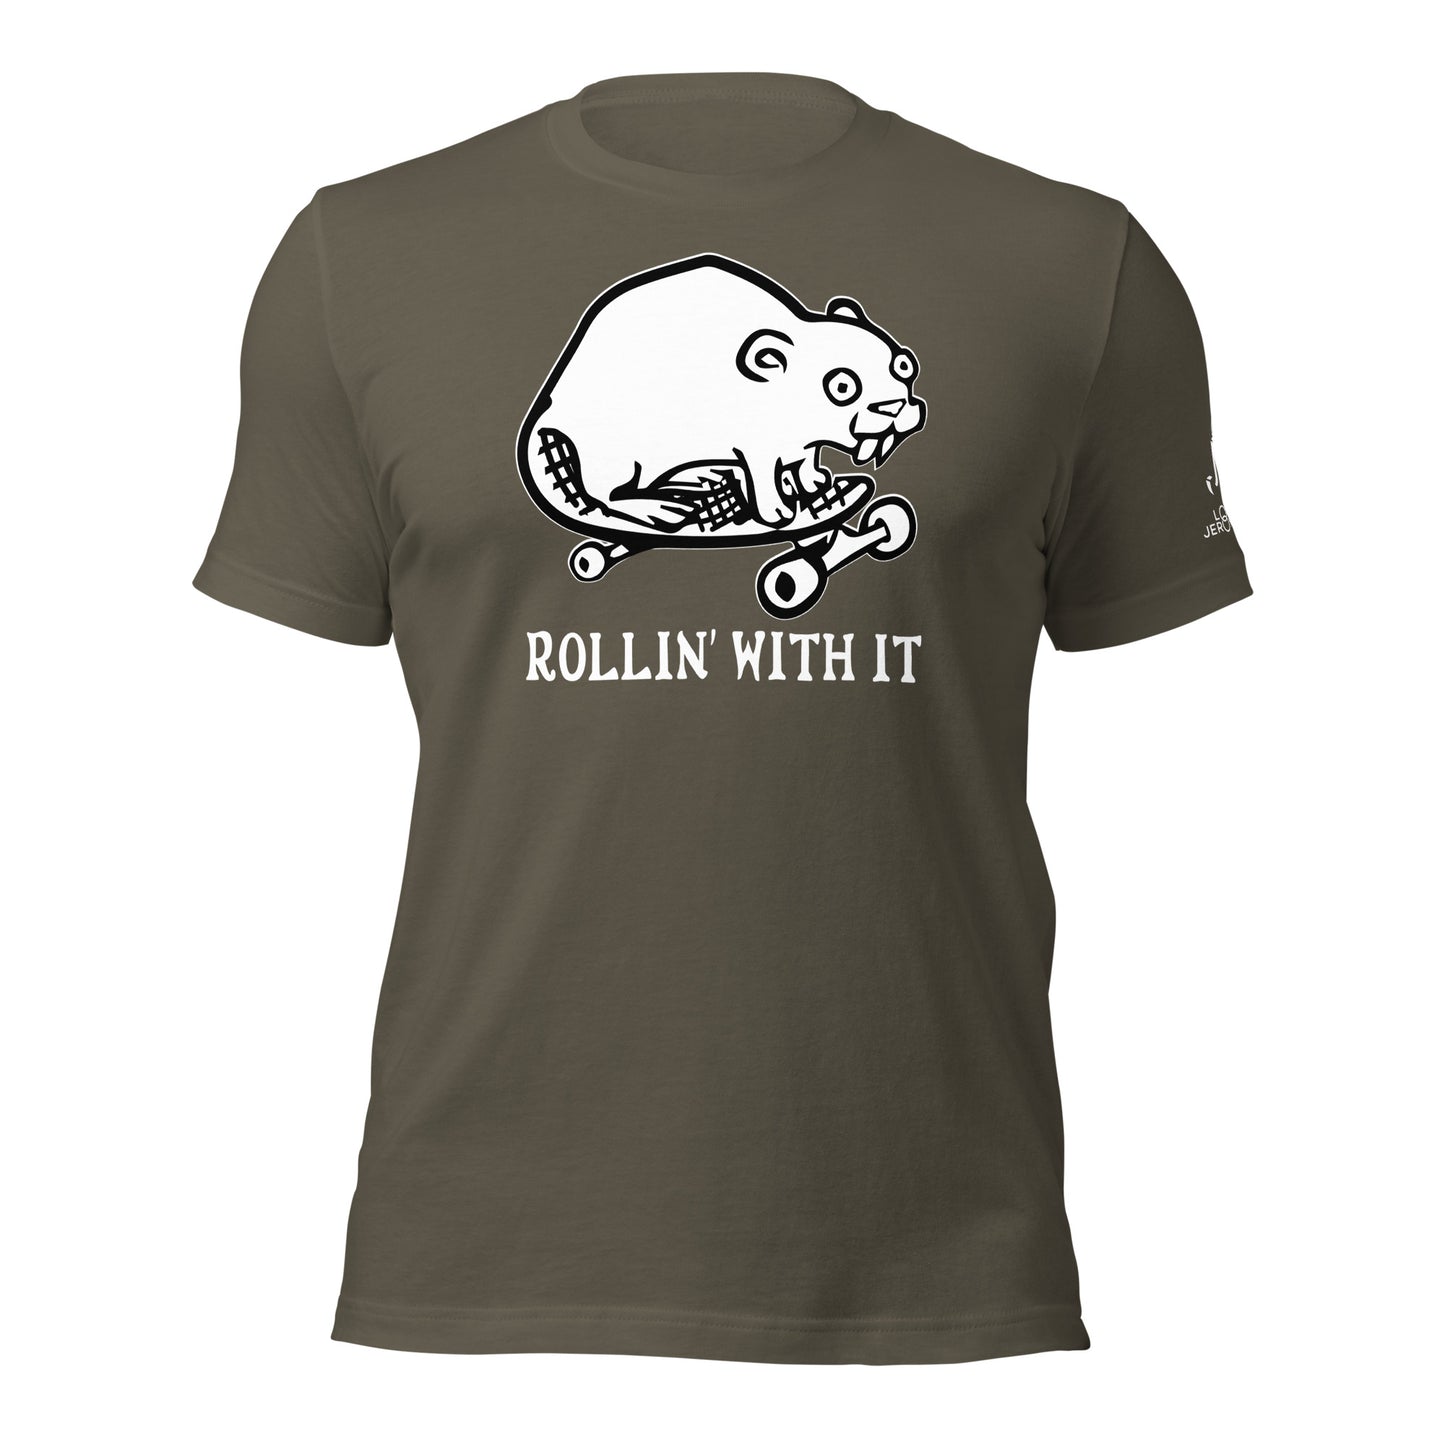 ROLLIN WITH IT - BELL+CANVAS - Unisex t-shirt